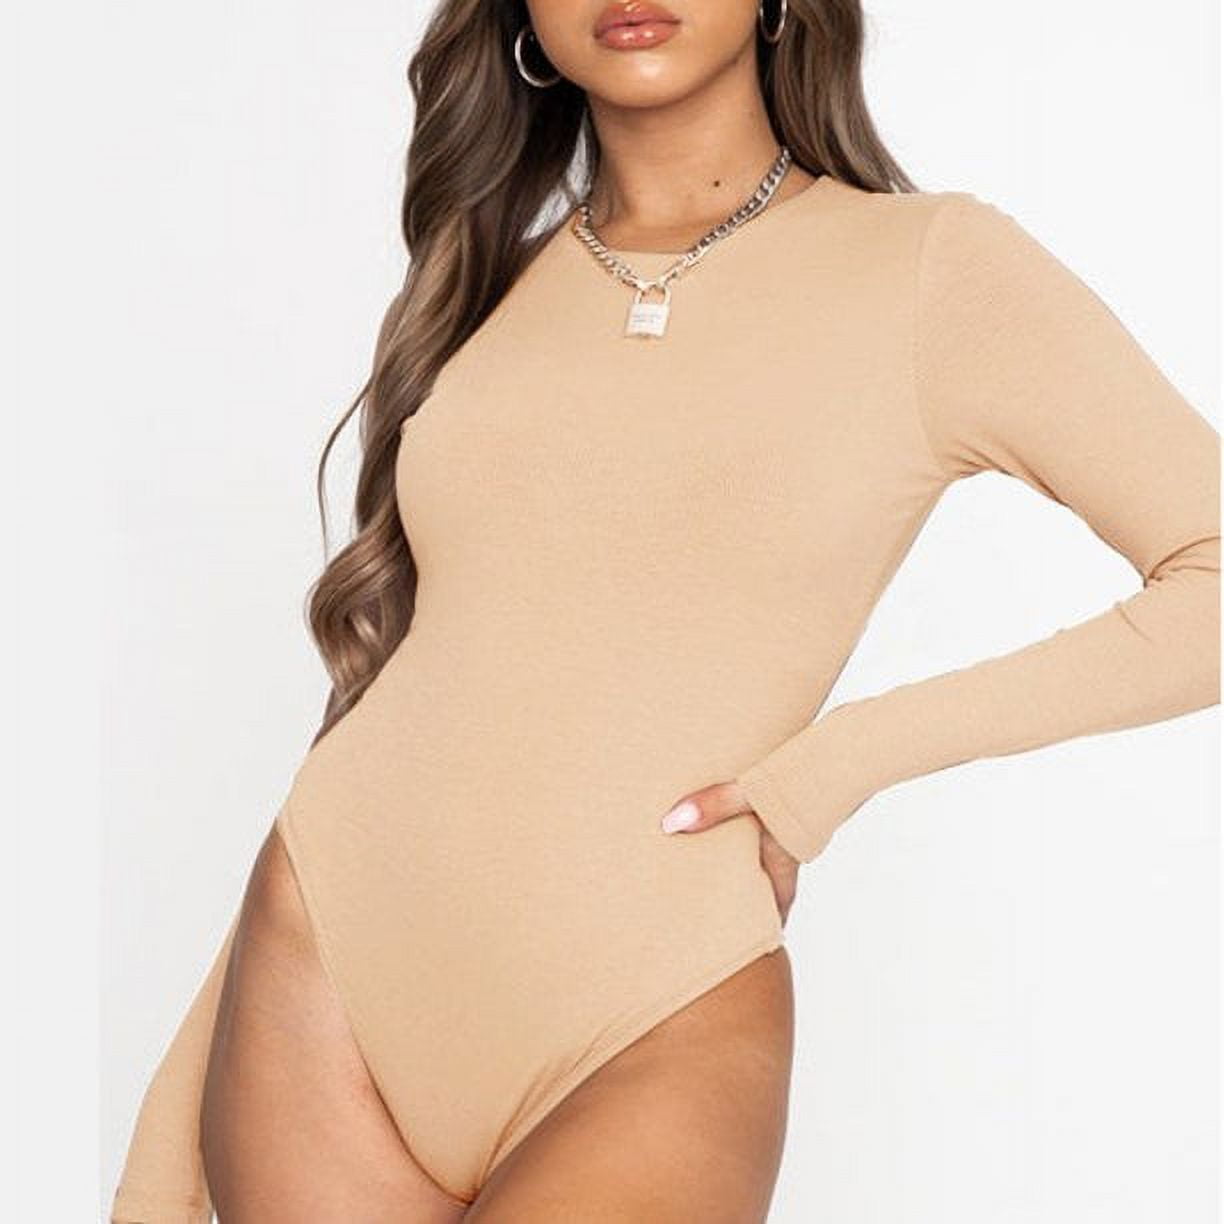  PUMIEY Bodysuits for Women Summer Tops Body Suits